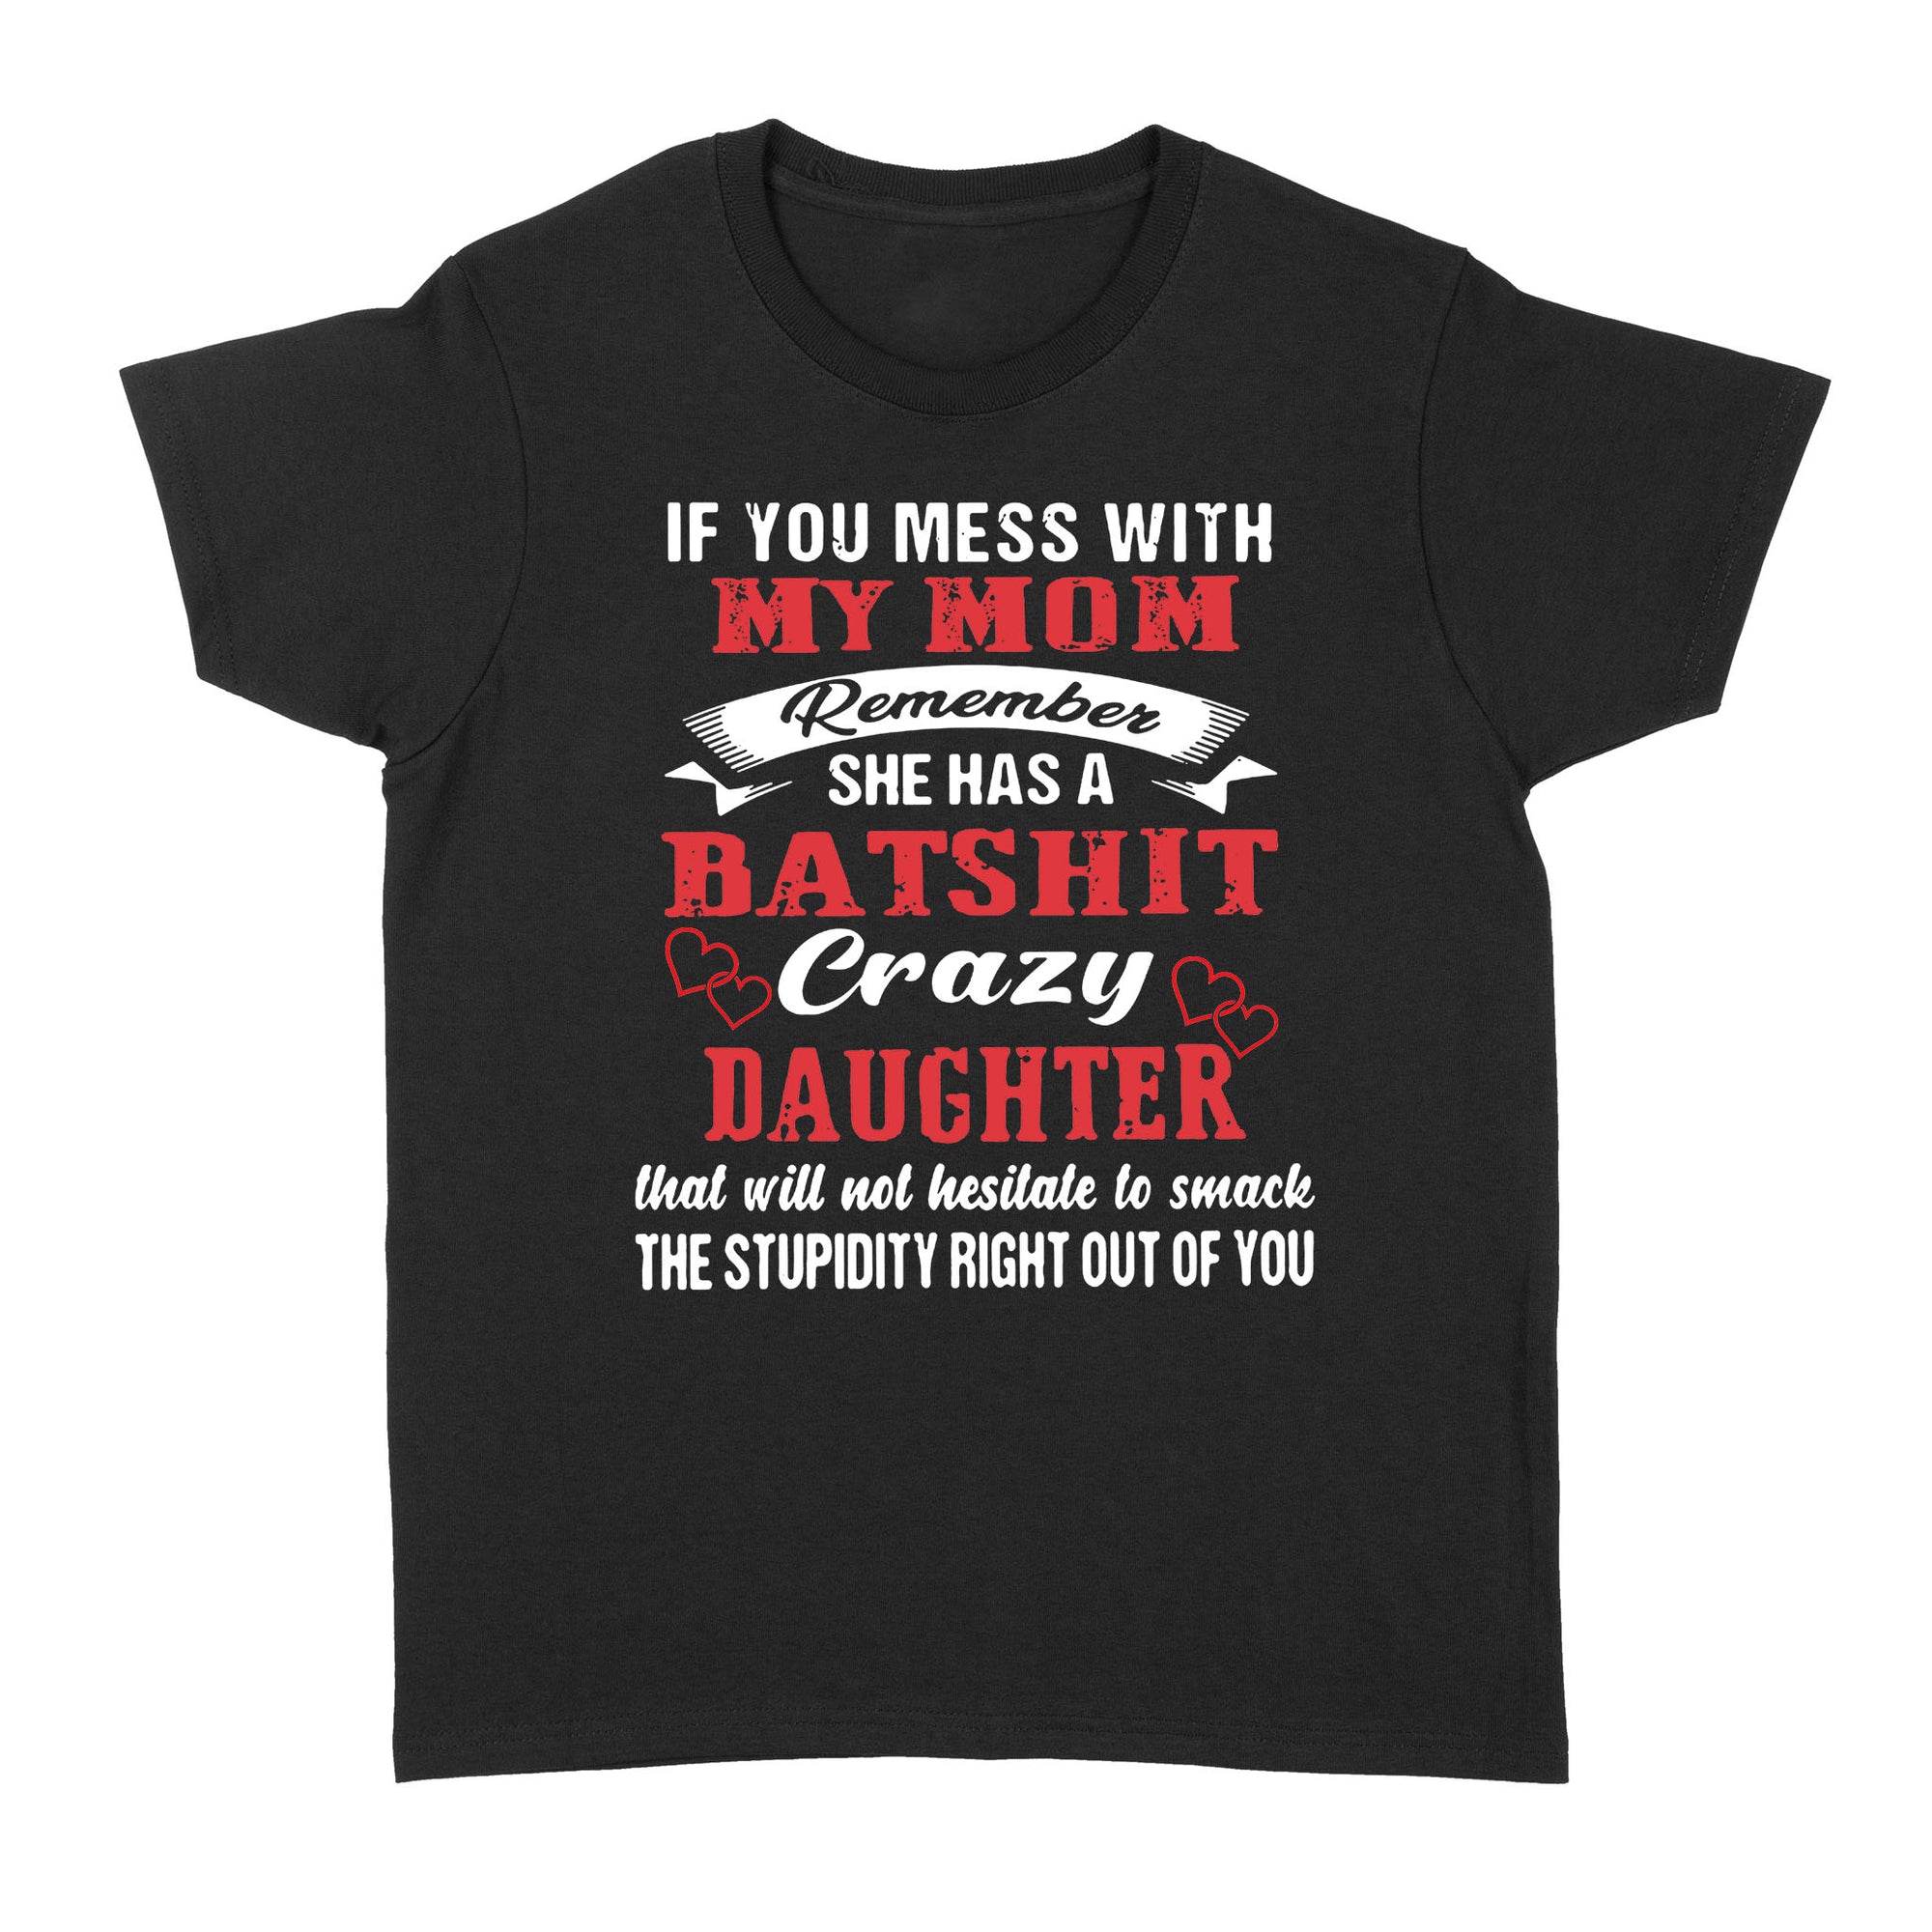 Gift Ideas for Daughter If You Mess With My Mom Remember She Has A Batshit Crazy Daughter That Will Not Hesitate - Standard Women's T-shirt